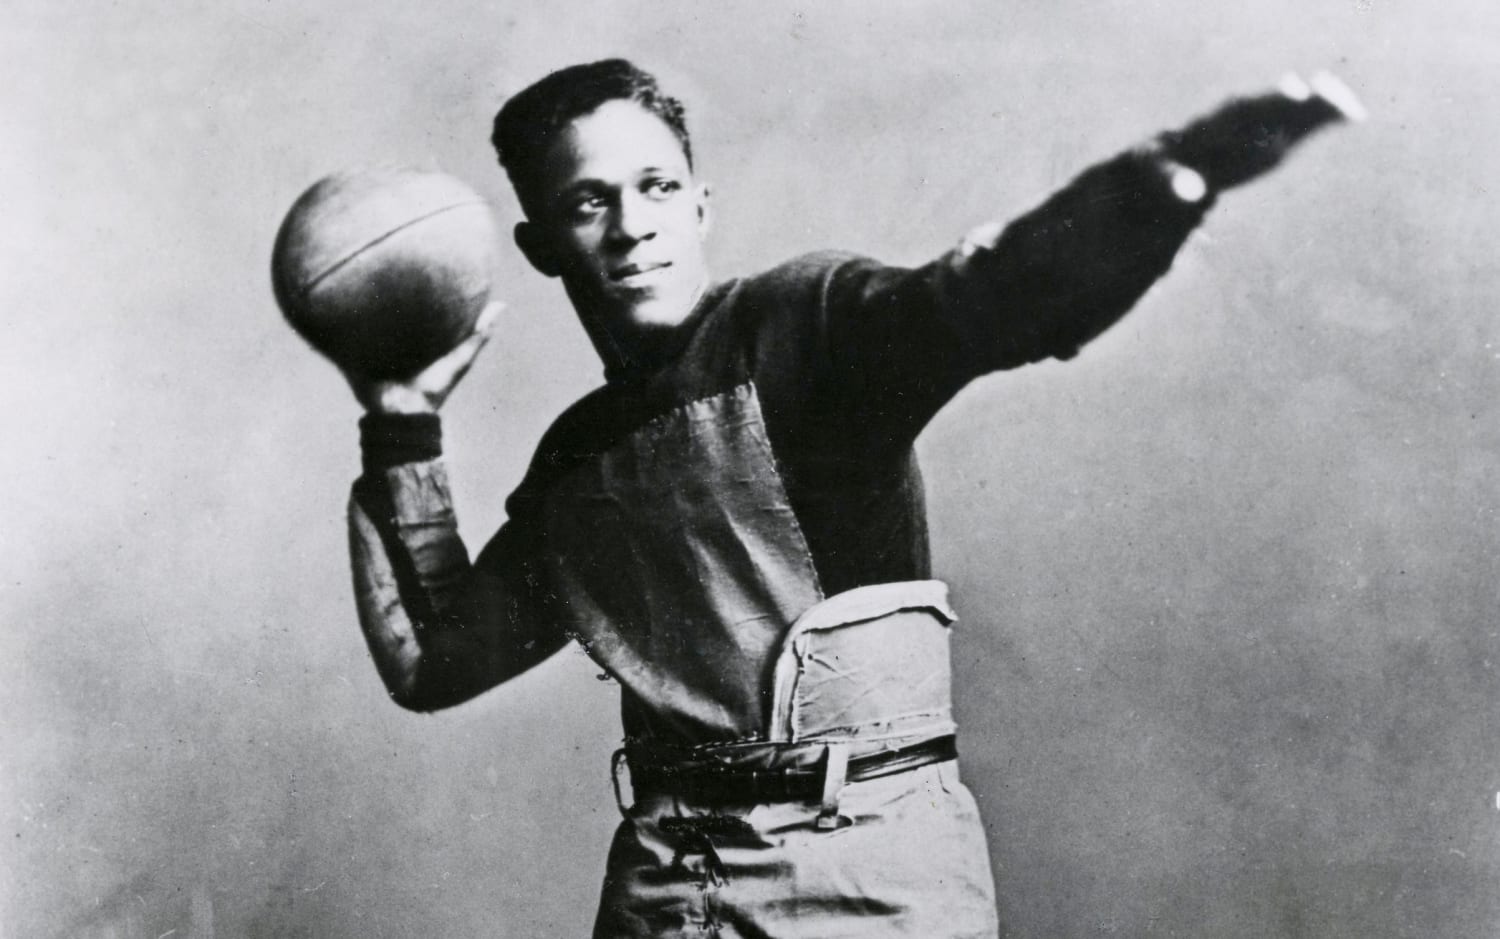 Fritz Pollard: An African American founding father of the NFL